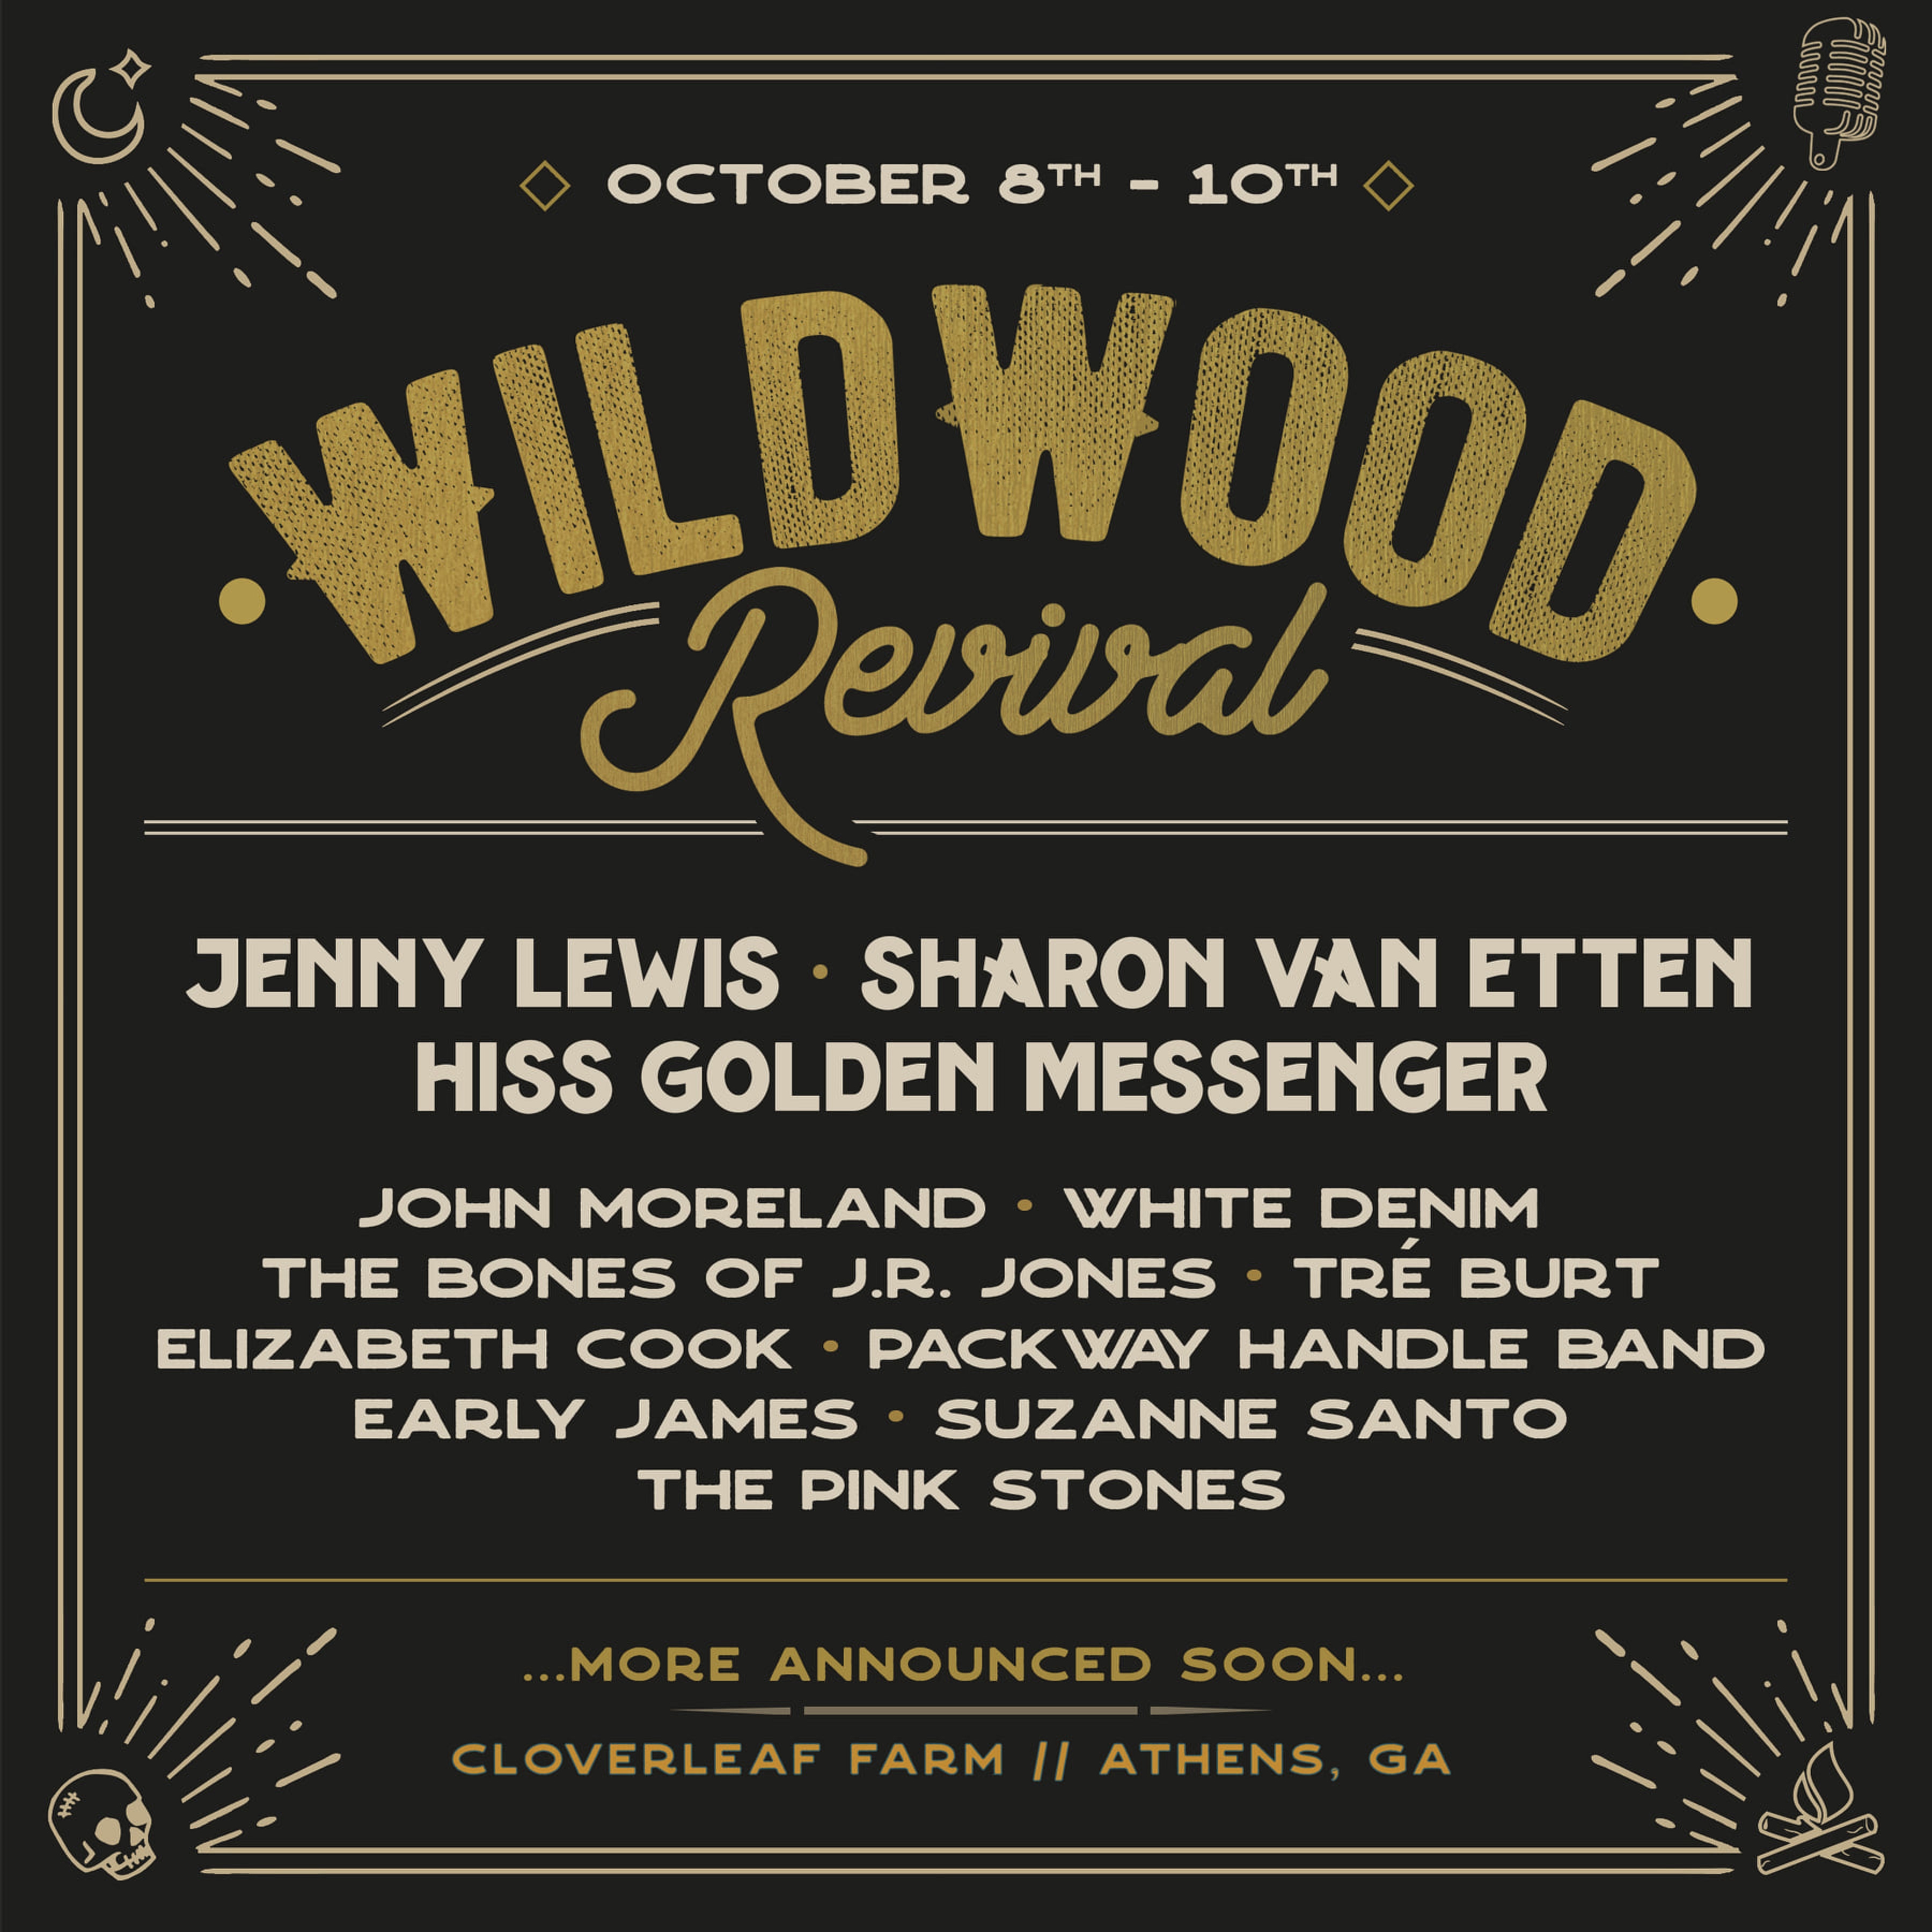 WILDWOOD REVIVAL RETURNS TO THE FARM WITH AN AMAZING FIRST ROUND LINEUP, OCTOBER 8 - 10, 2021